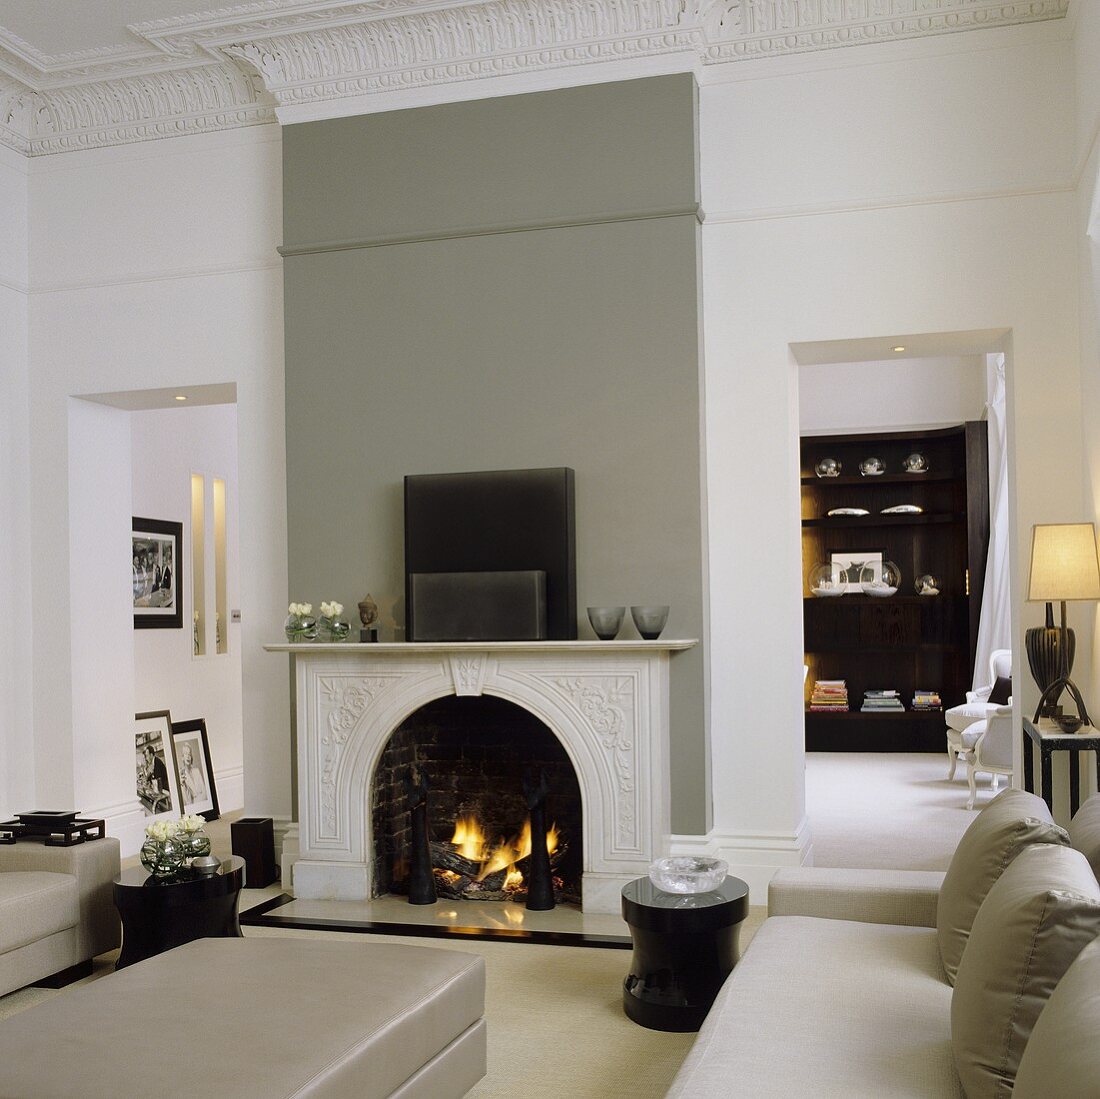 A renovated art nouveau-style living room with a grey leather sofa in front of a fireplace in a grey wall and a view of a cupboard